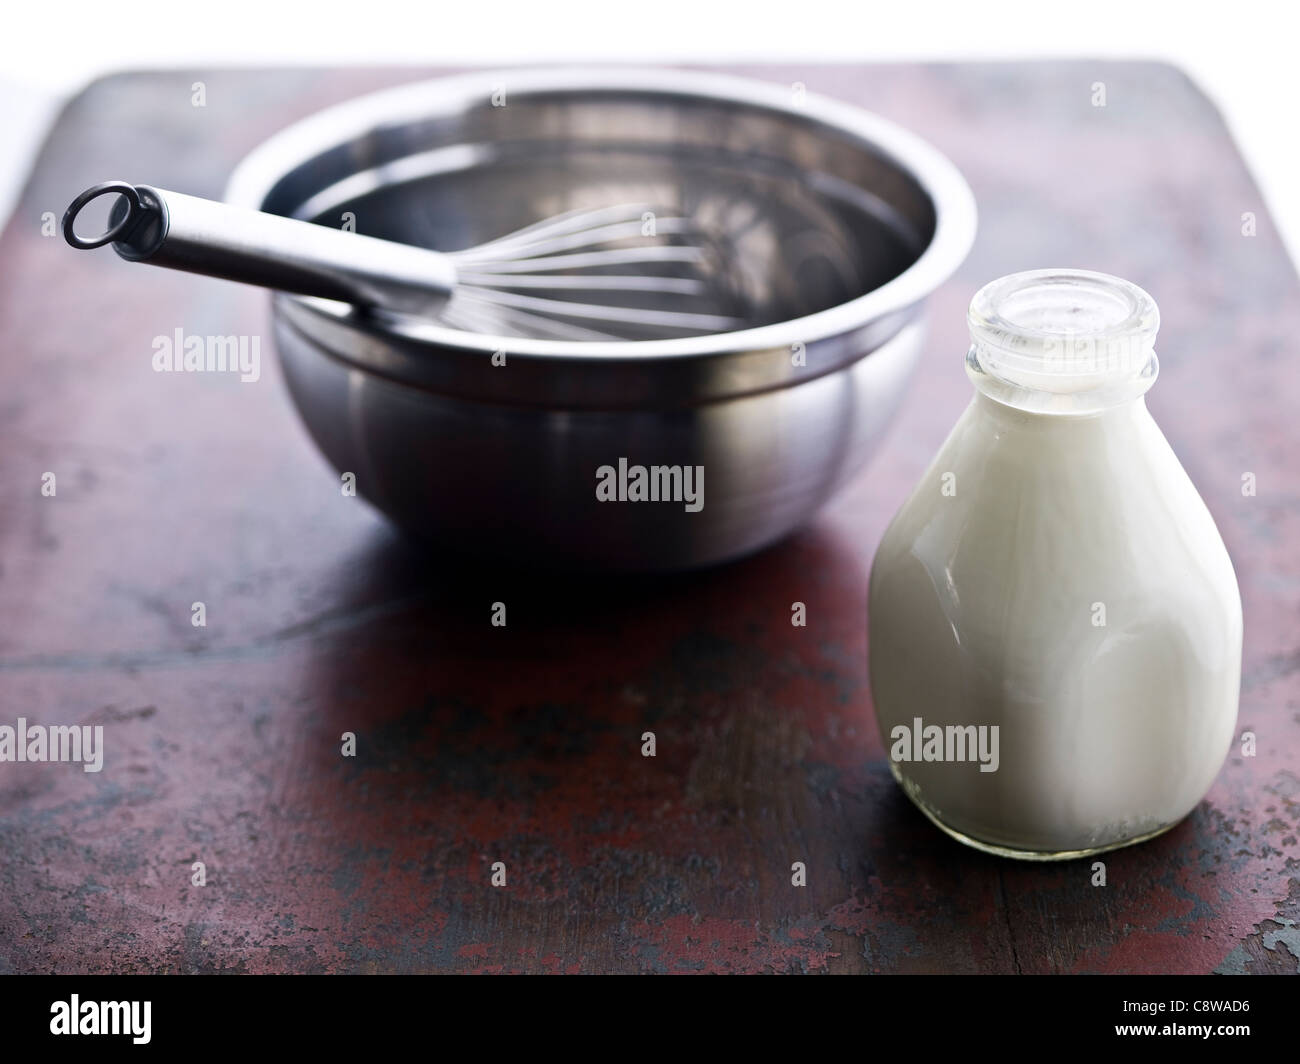 Bowl, wire whisk and milk in bottle Stock Photo